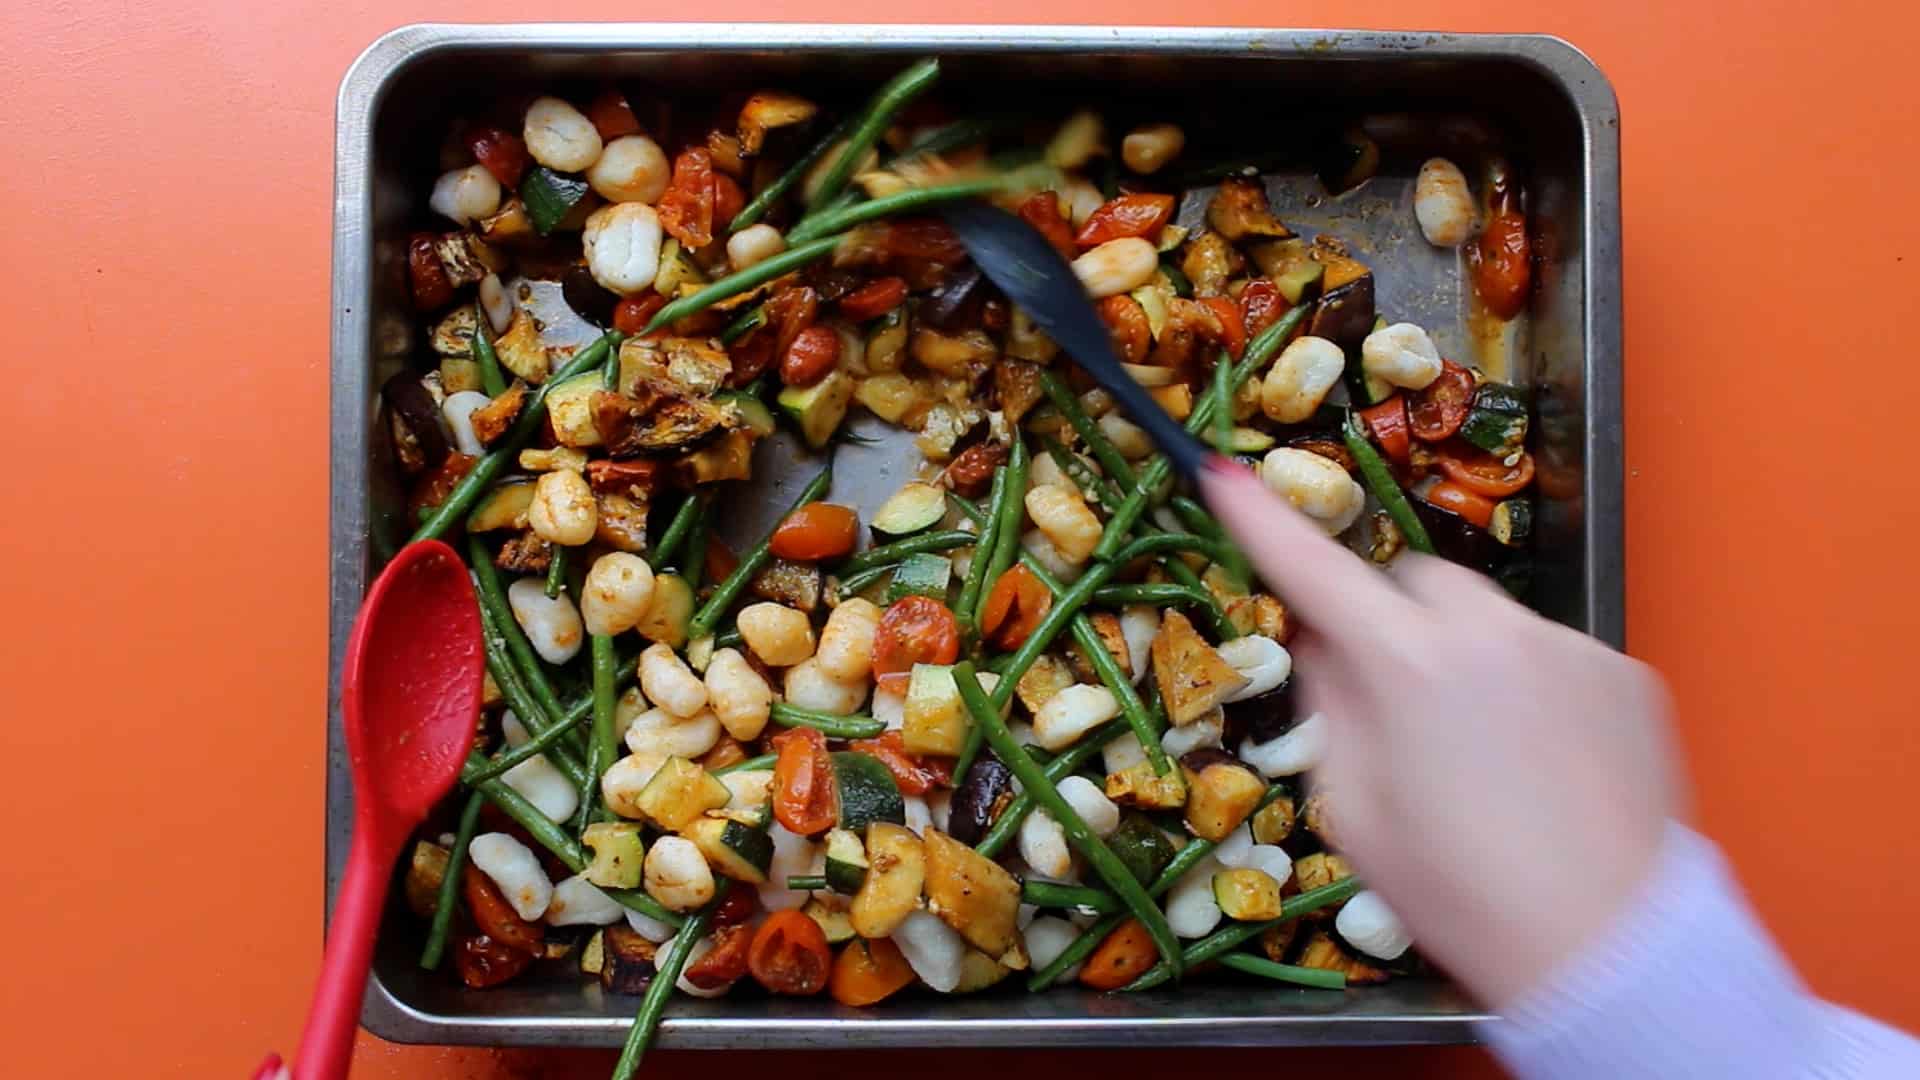 Gnocchi, green beans, chorizo and roasted vegetables mixed together in the baking tray.